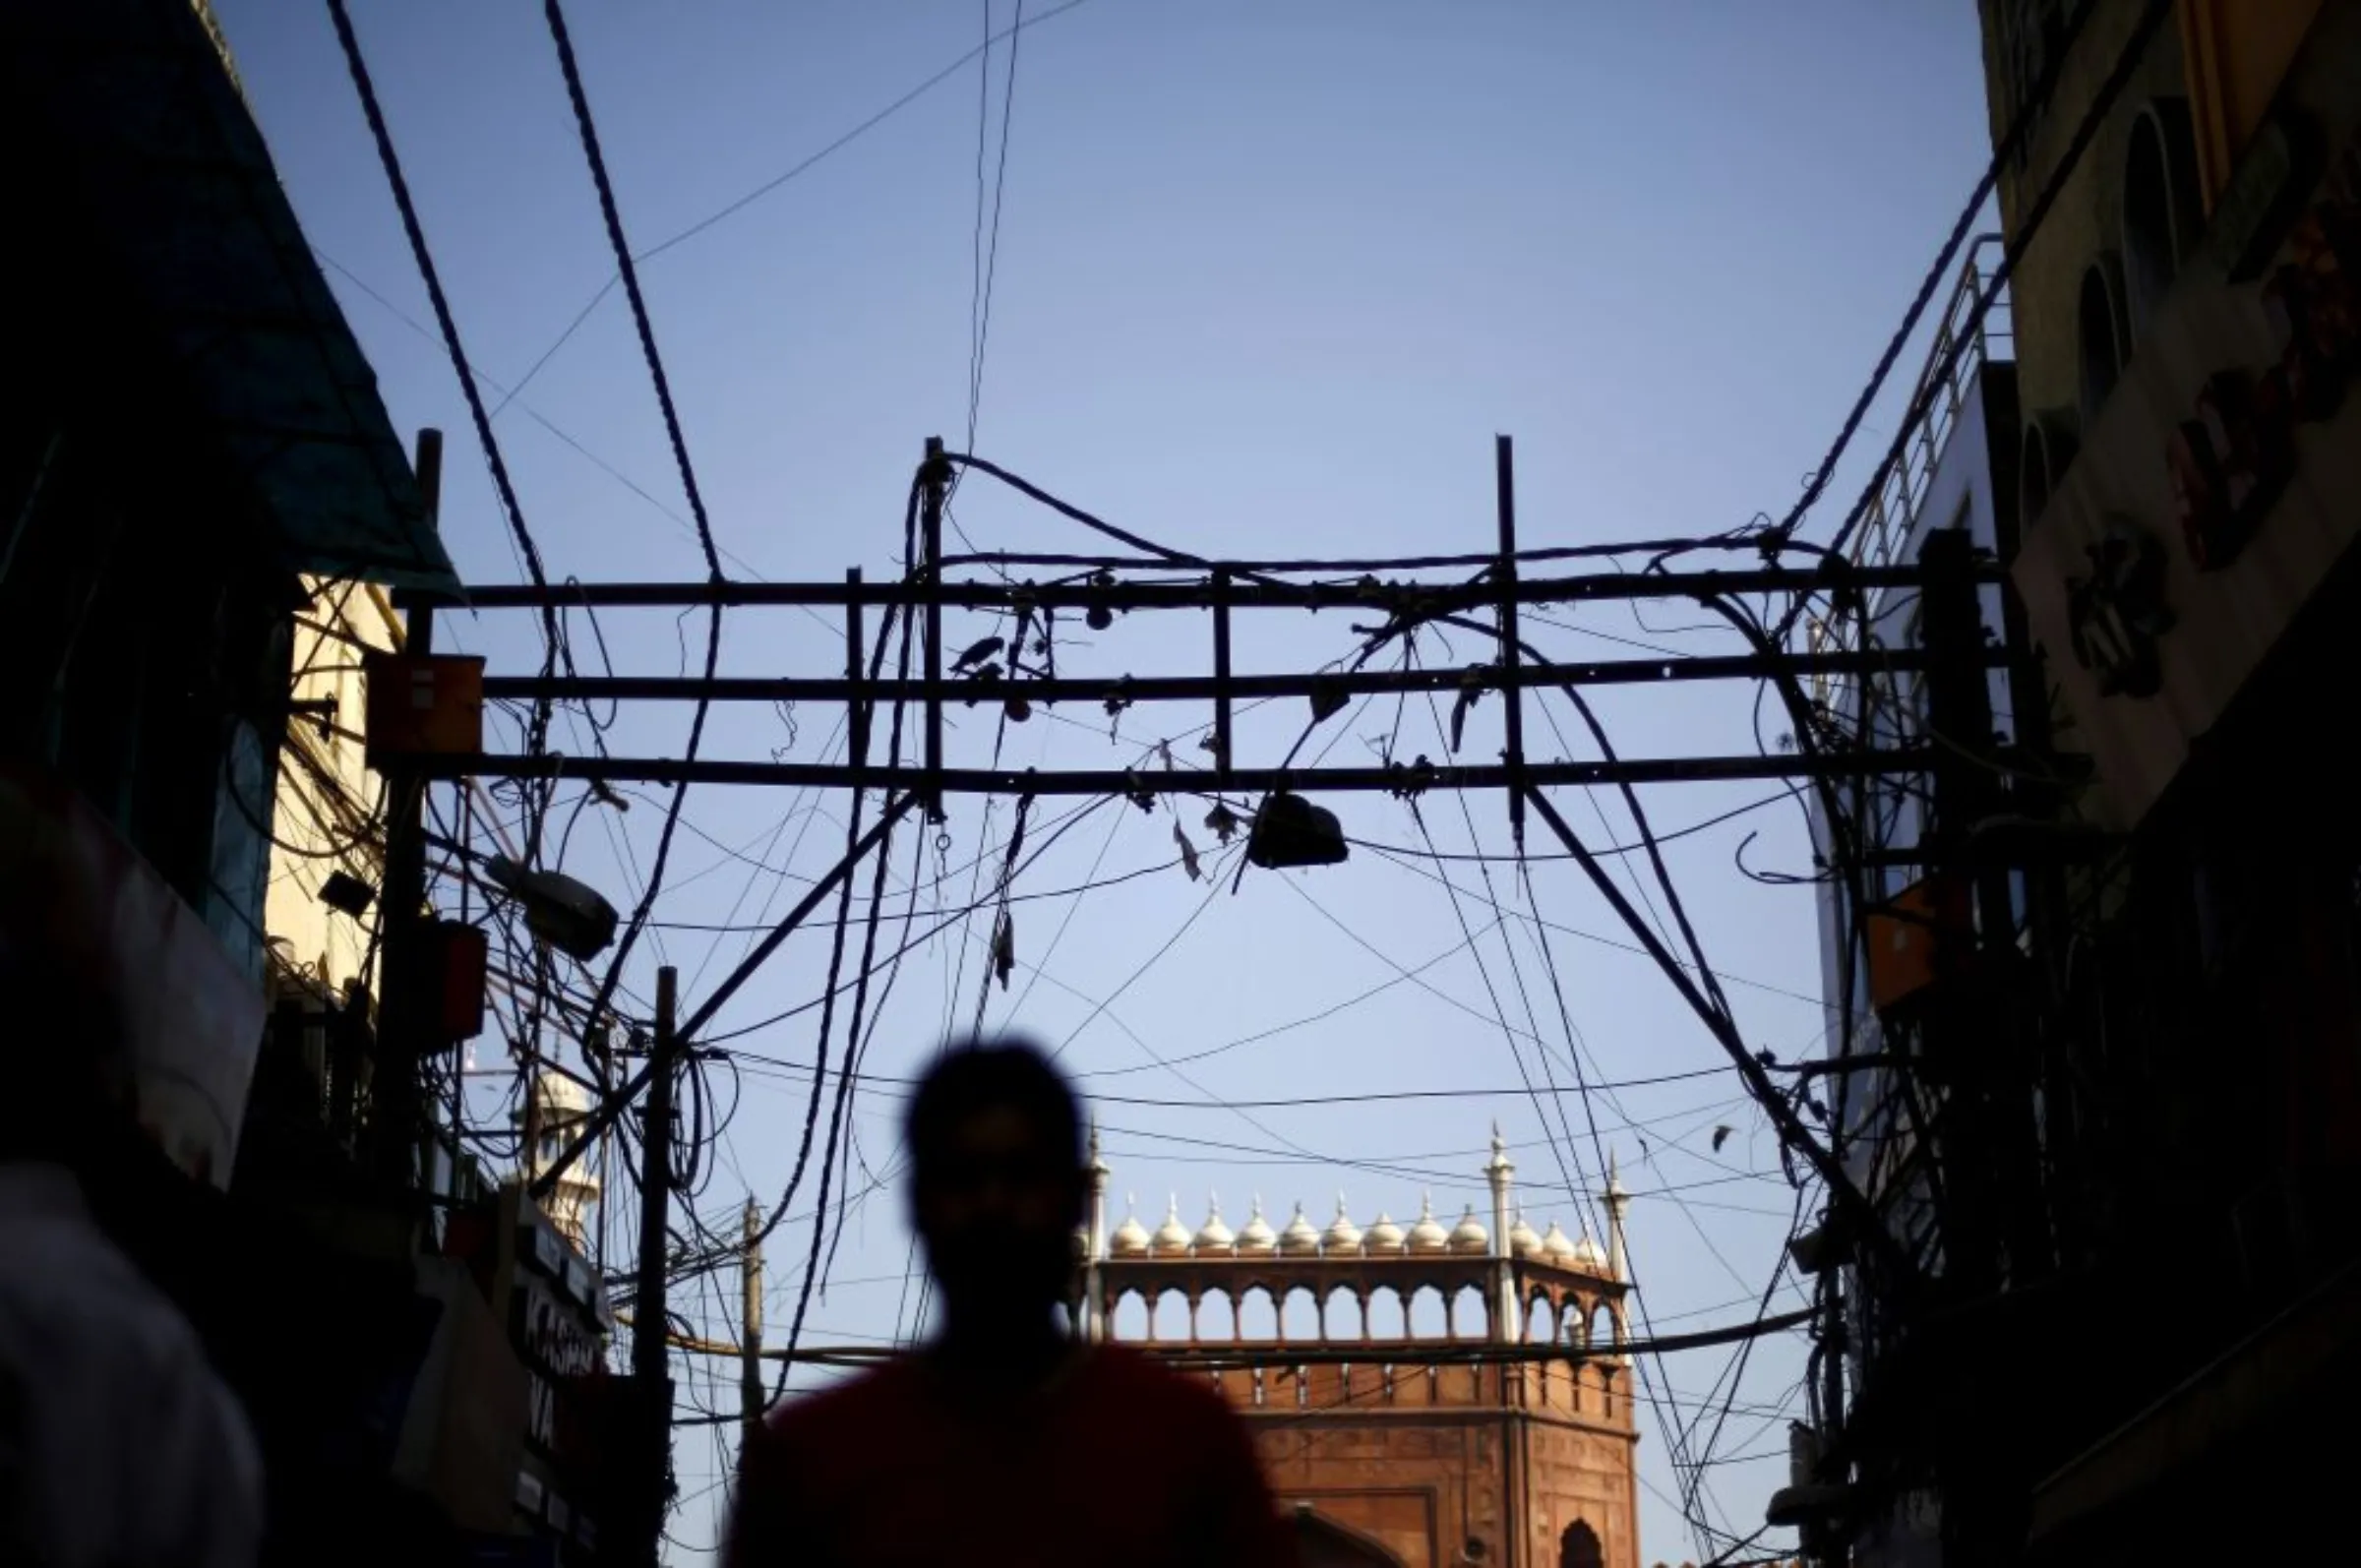 A man is silhouetted against the backdrop of Jama Masjid (Grand Mosque) as overhead power cables are seen in the old quarters of Delhi, India, September 10, 2015